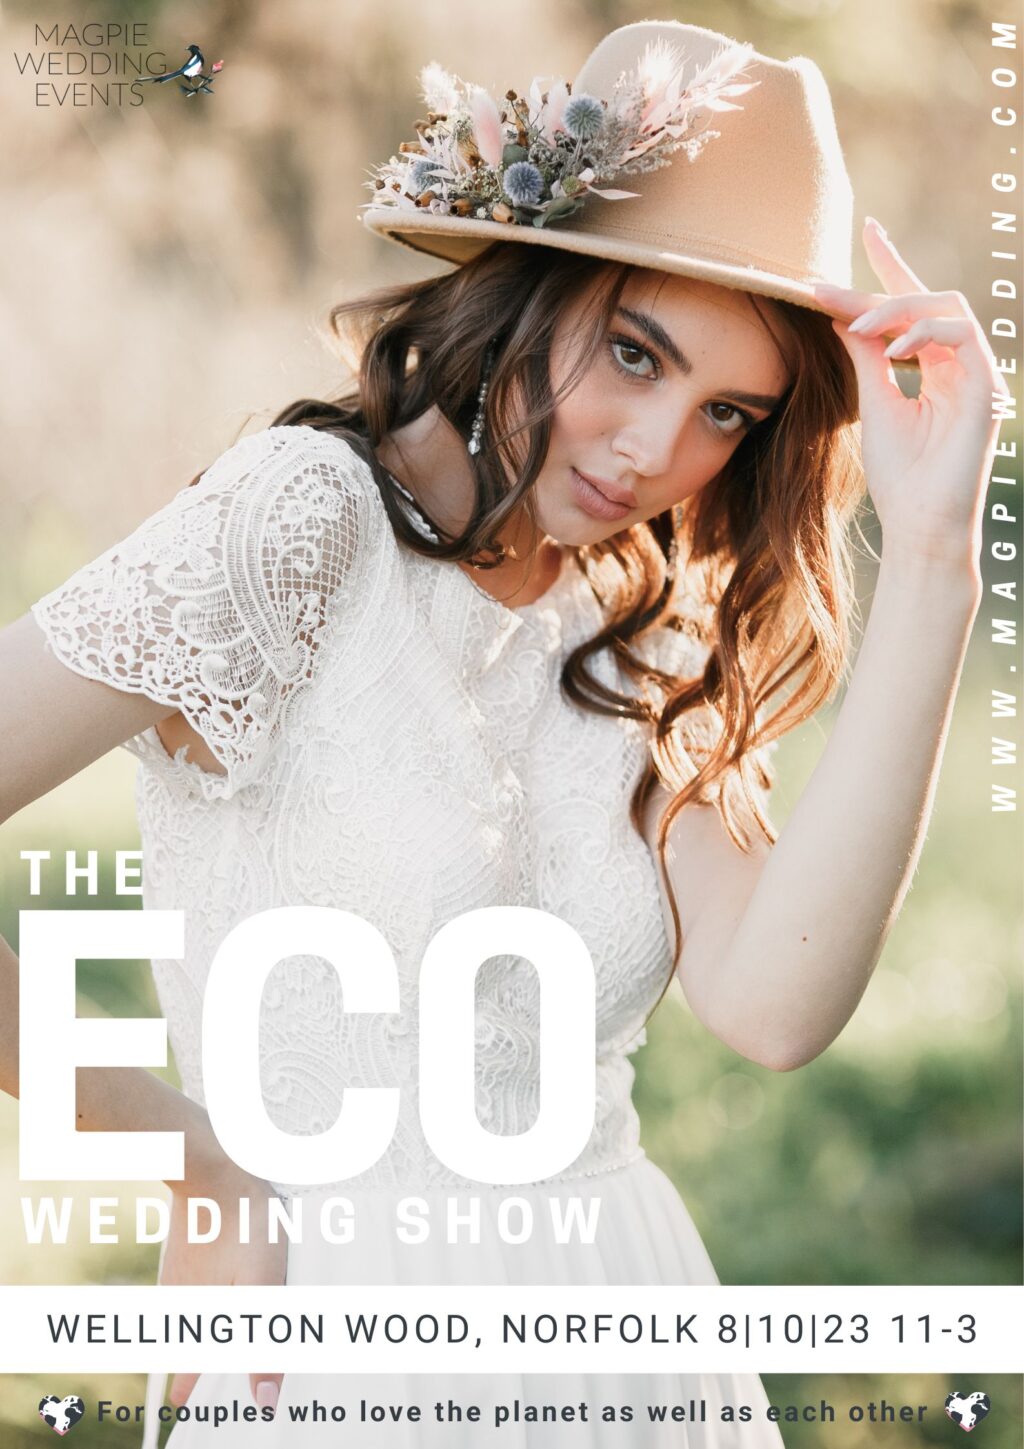 The ECO Wedding Show by Magpie Wedding Norfolk